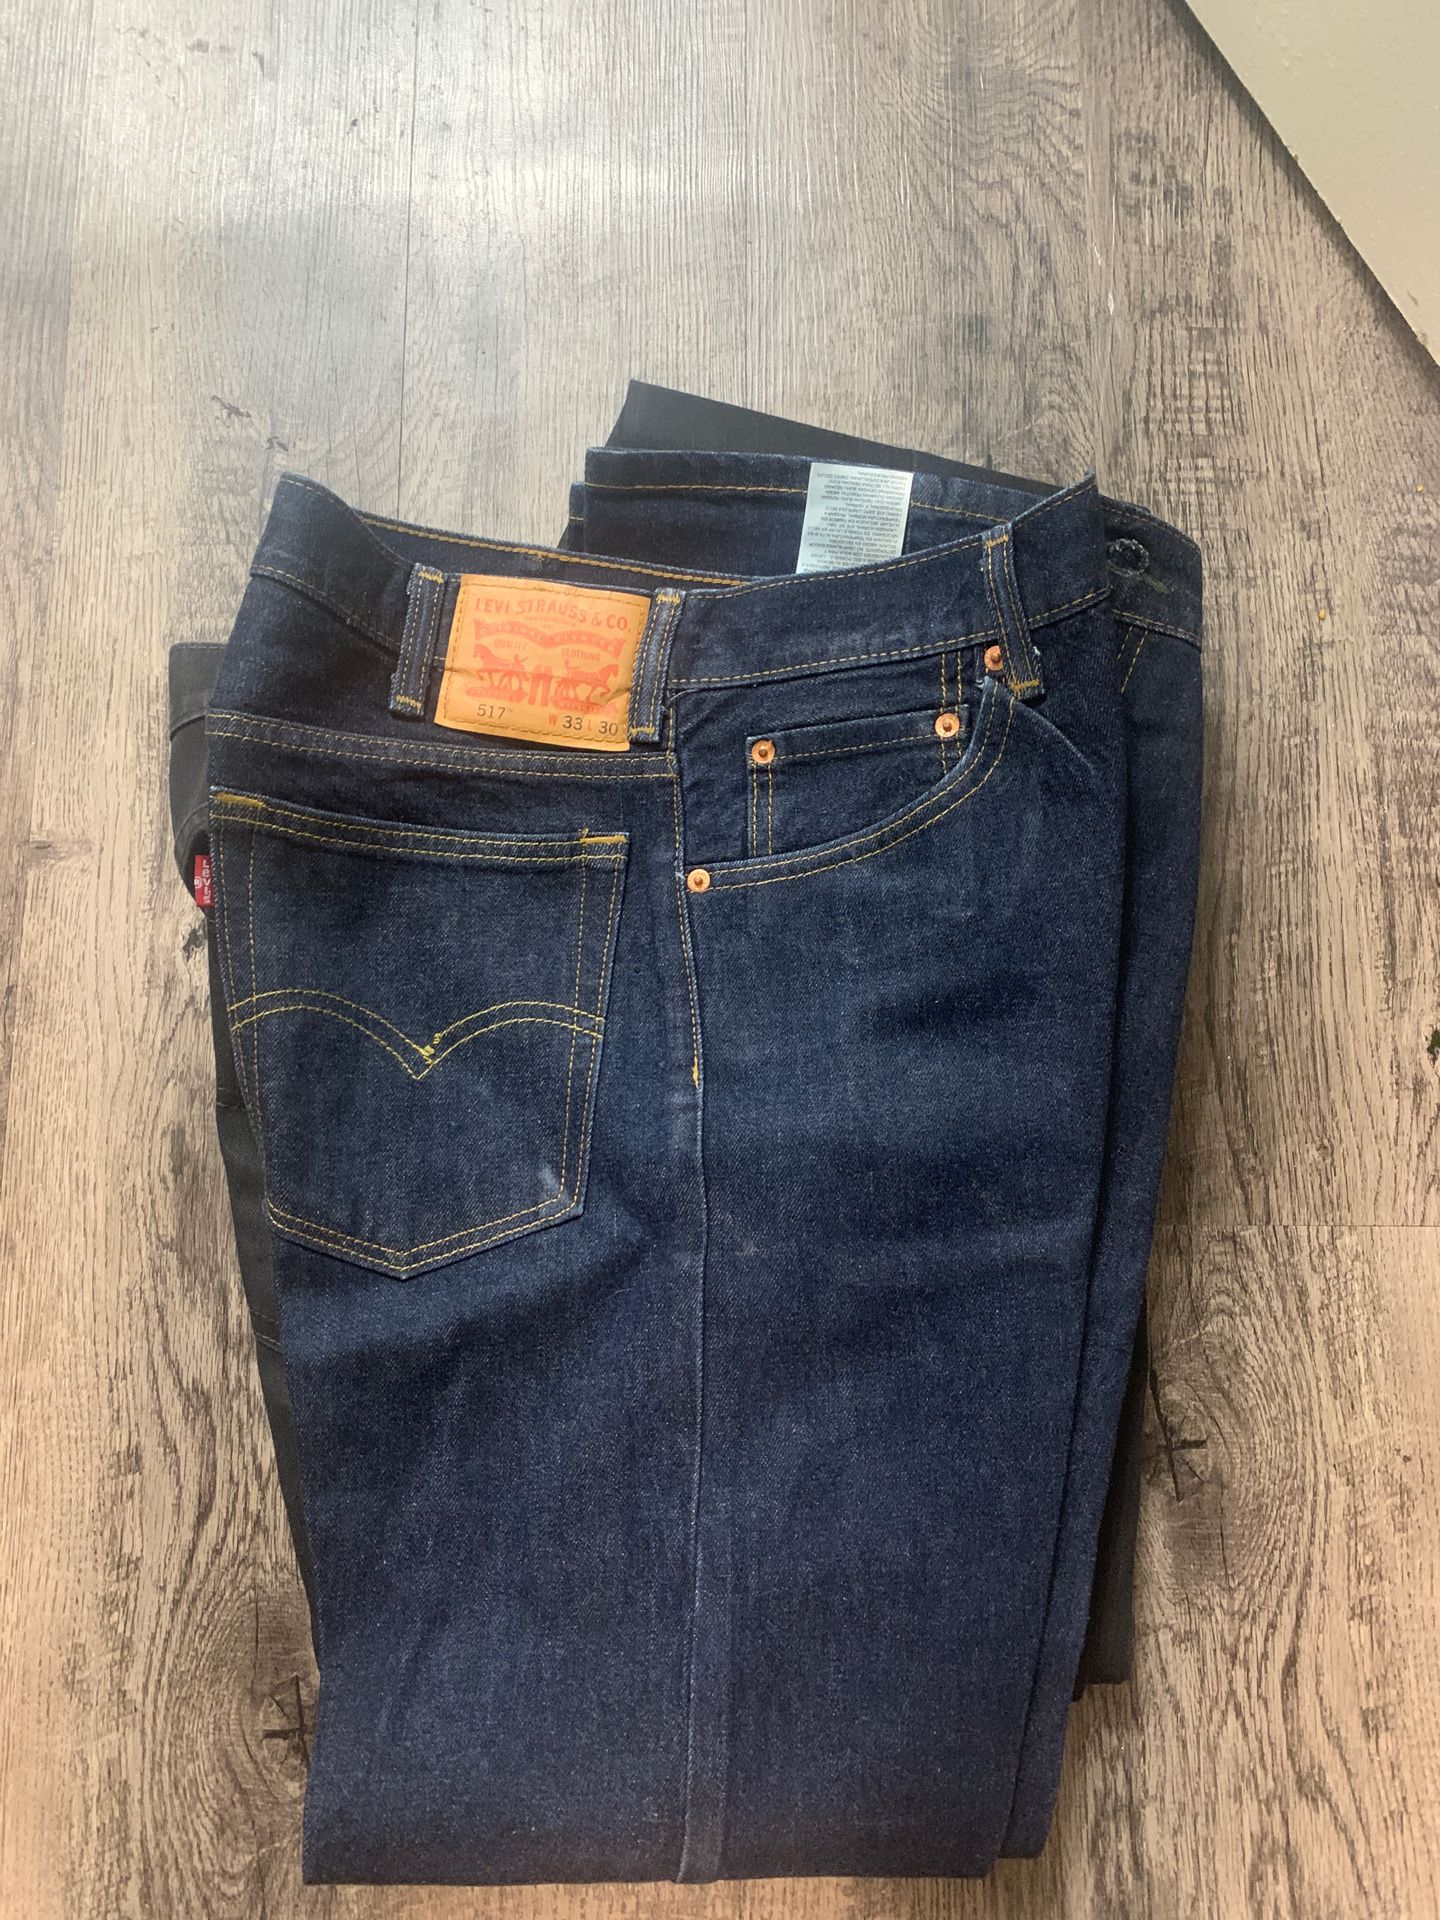 Levi jeans for sale 33/30